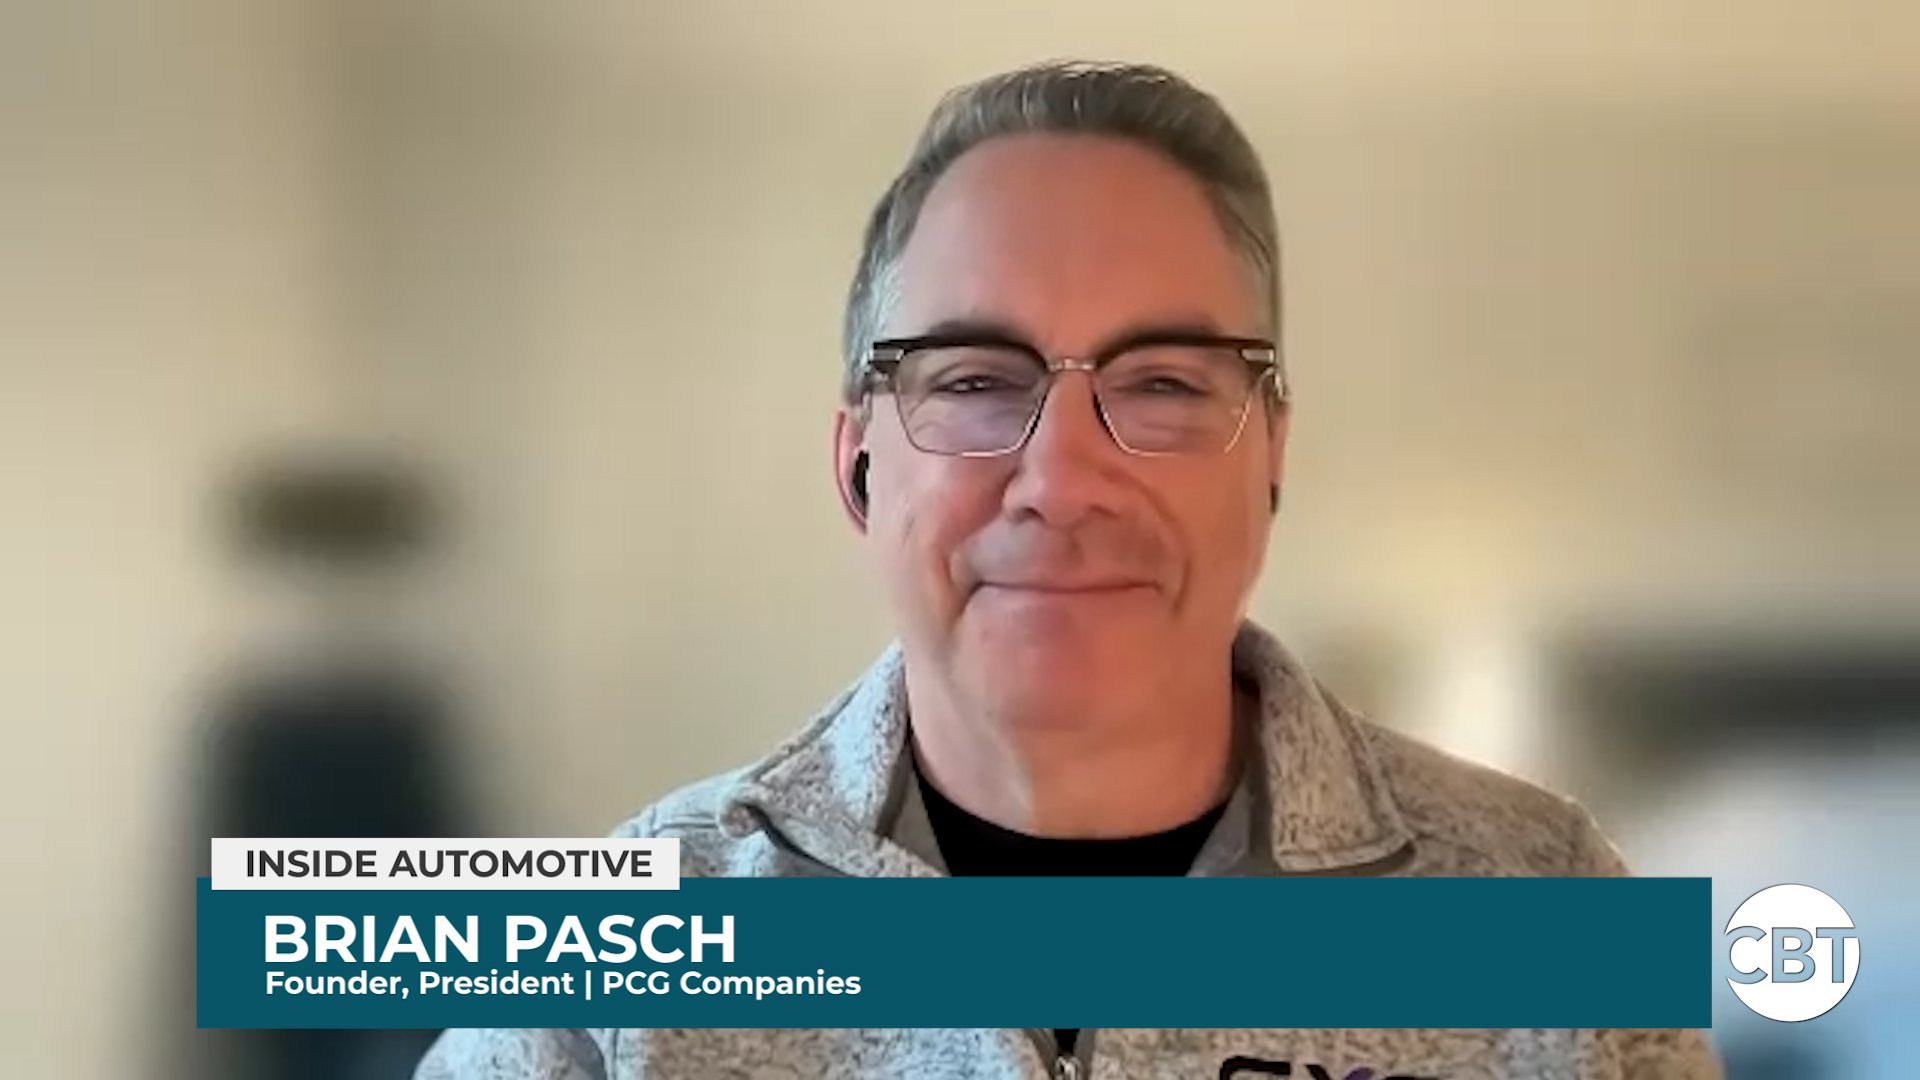 Brian Pasch joins Inside Automotive to discuss the upcoming Google Analytics 4 launch, and its significance for automotive retailers.